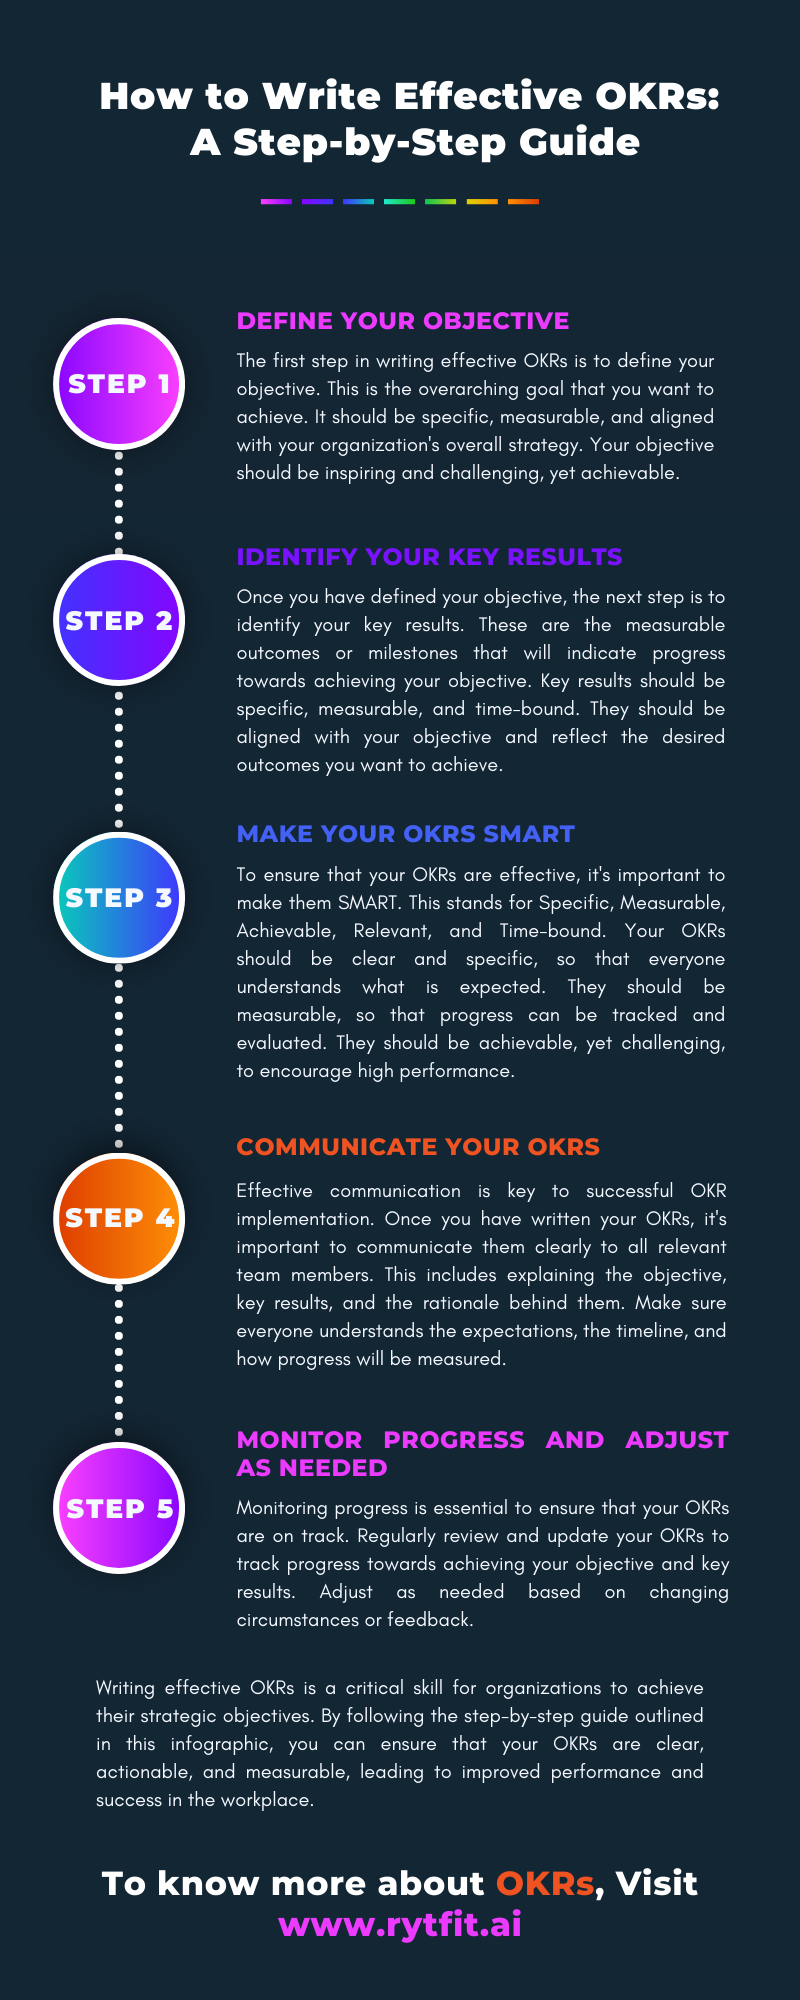 An infographic showing a step-by-step guide on how to set effective OKRs (Objectives and Key Results) in order to achieve business goals.